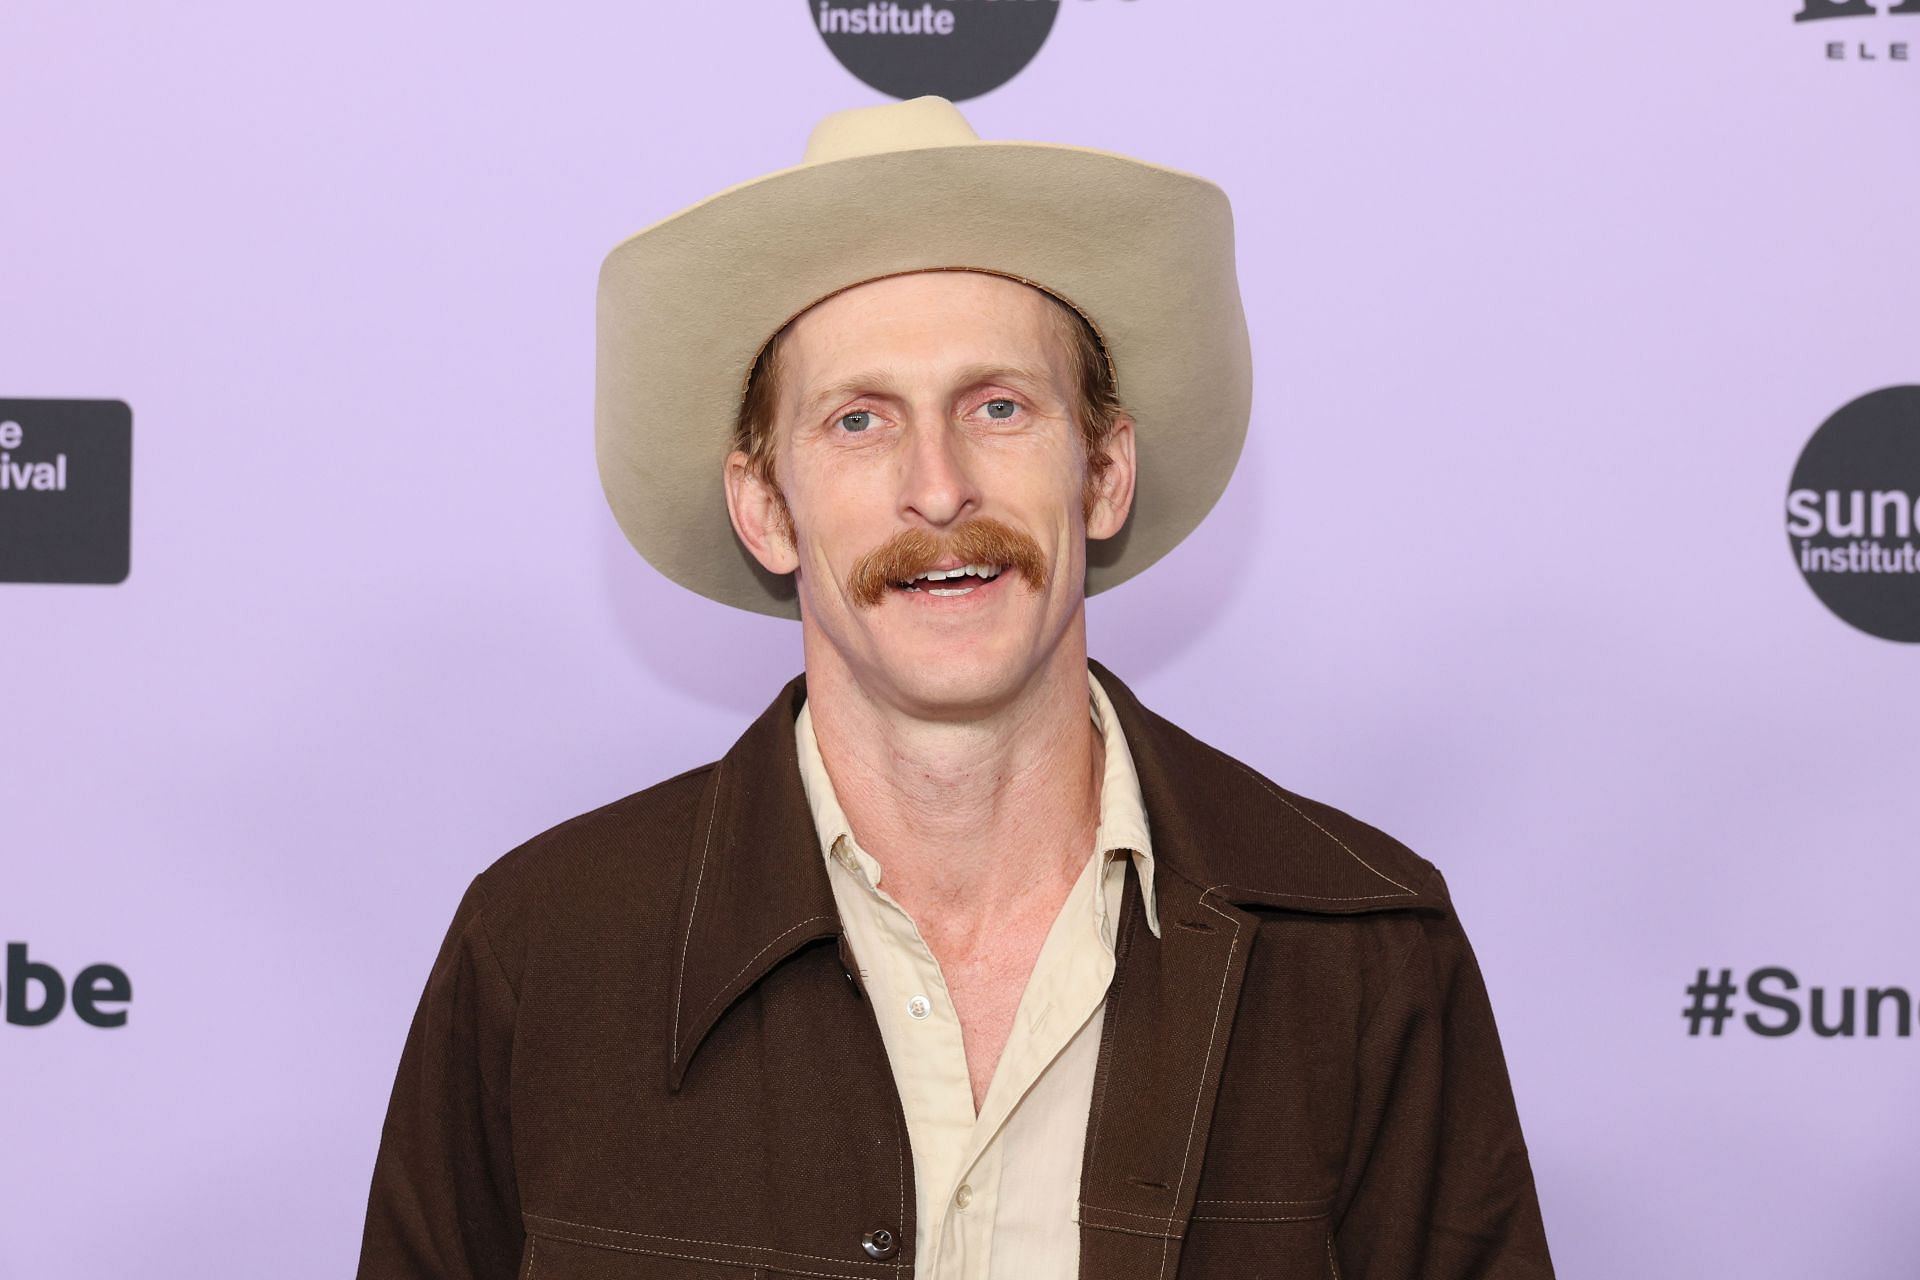 Austin Amelio plays the role of Jasper in Hit Man (Photo by Dia Dipasupil/Getty Images)